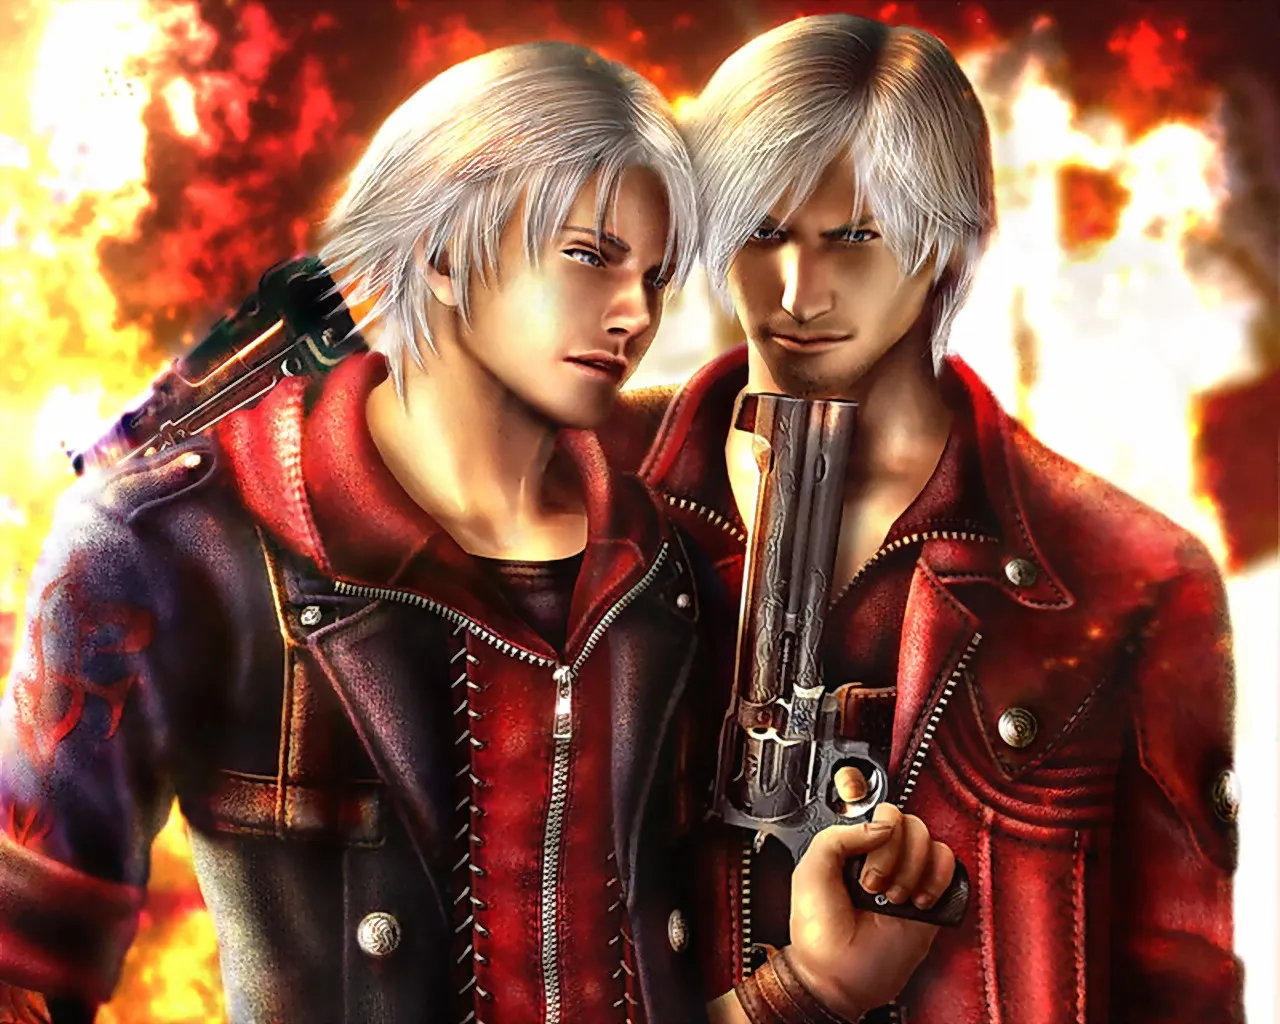 Devil may cry game. Devil May Cry 4 Данте. Данте ДМС 3. Данте из Devil May Cry. Данте и Неро.